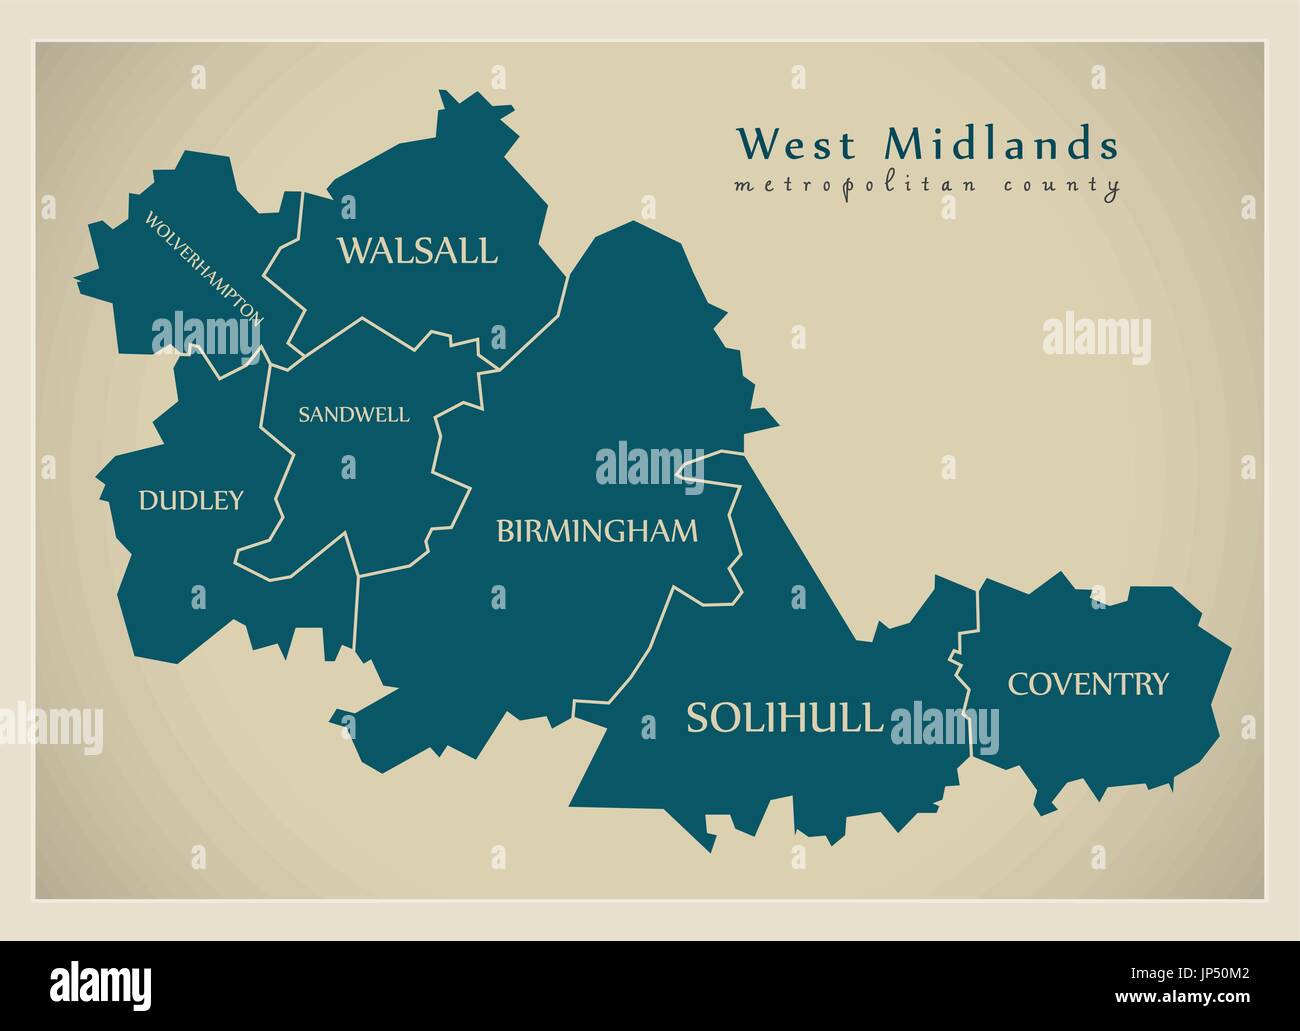 Modern Map - West Midlands metropolitan county with district captions ...